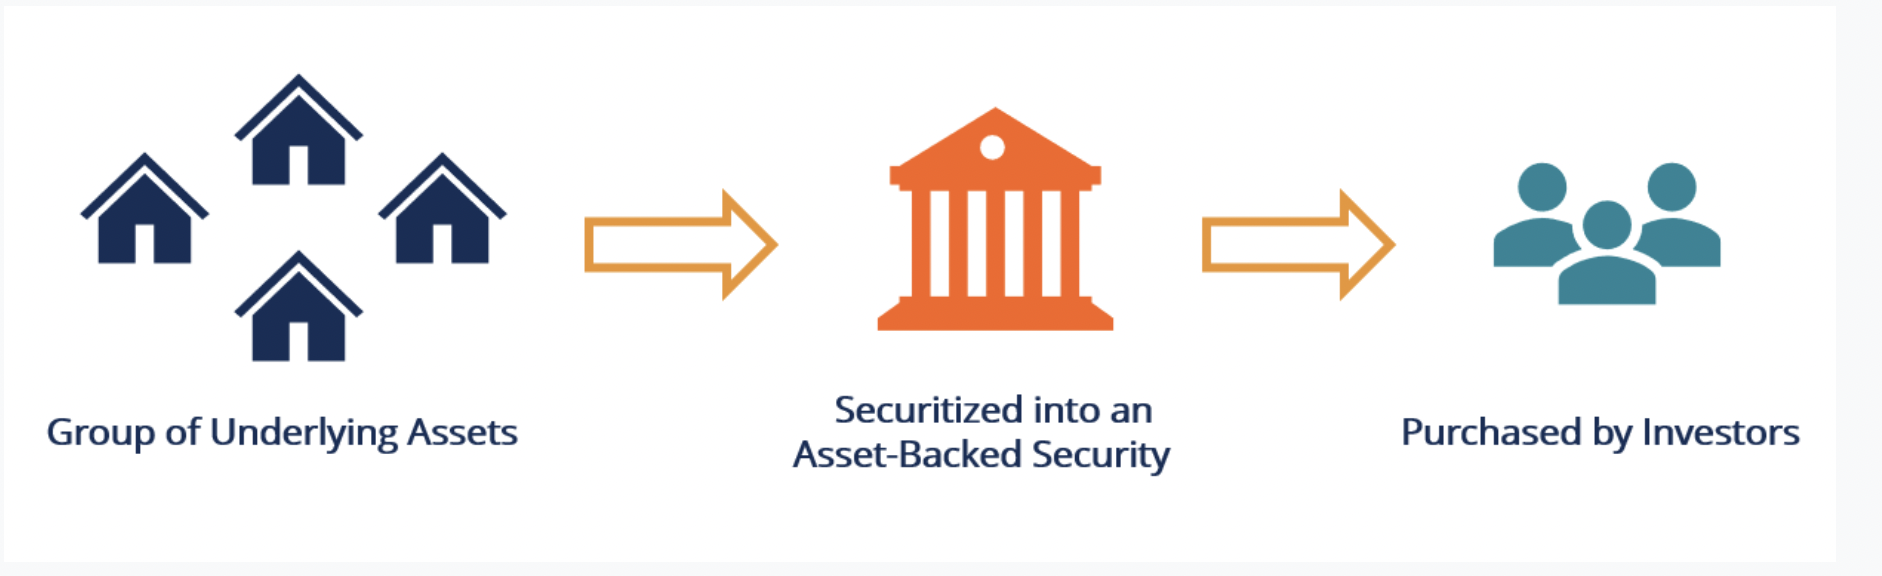 Security meaning. Секьюритизация. Asset backed Securities. Недостатки секьюритизации в ипотеке.